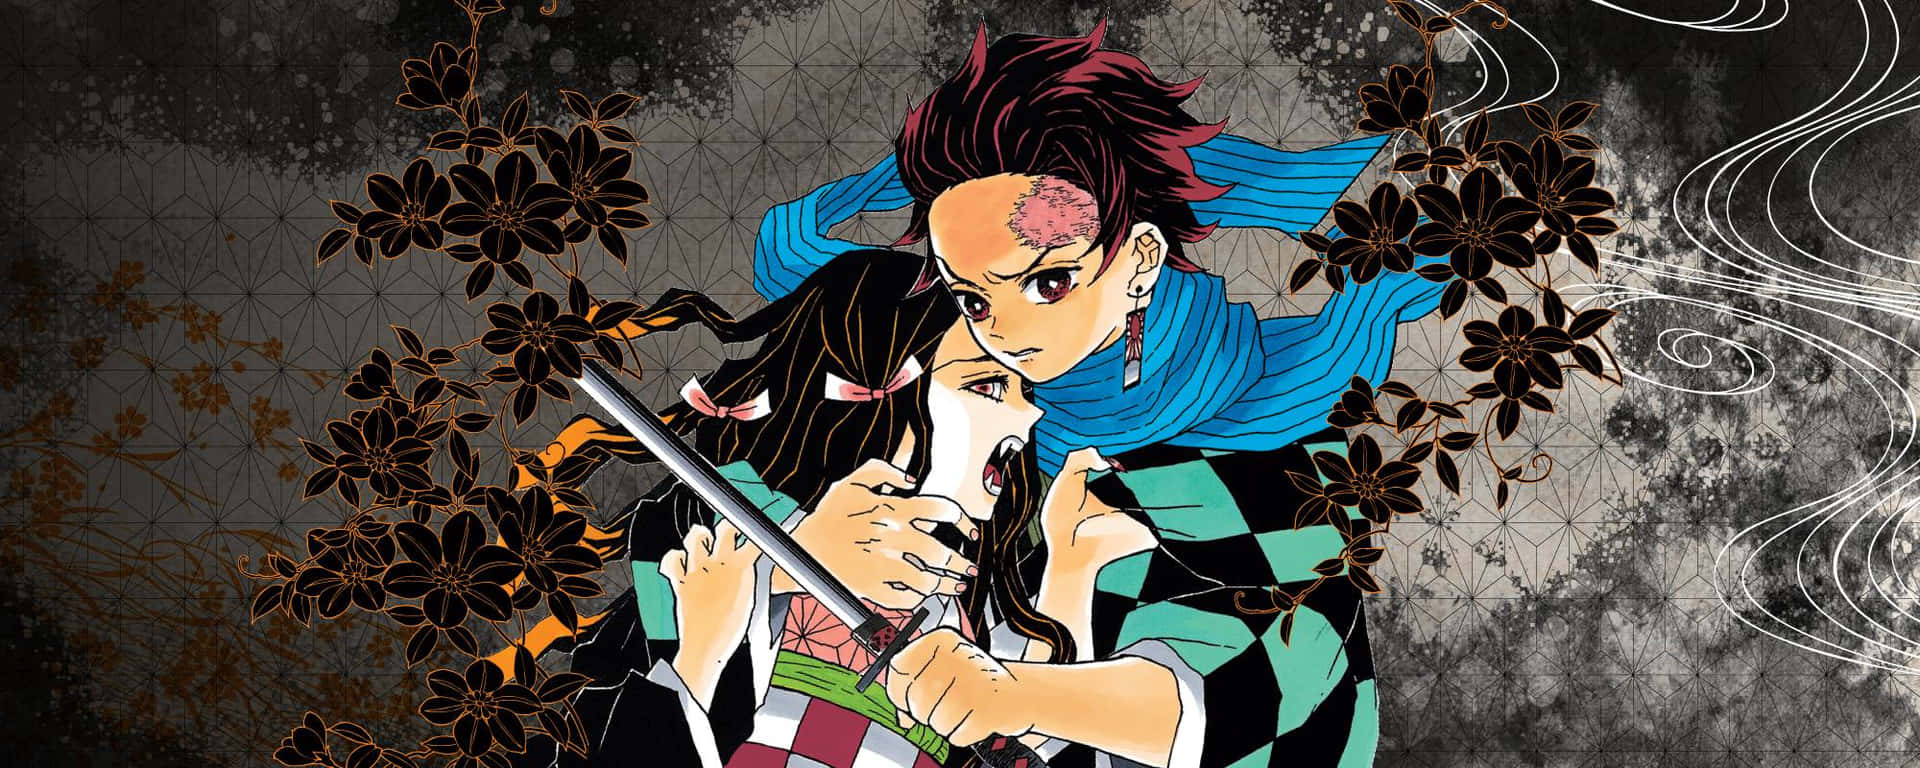 Join Tanjiro and his friends on their quest to save Nezuko in Demon Slayer Manga Wallpaper